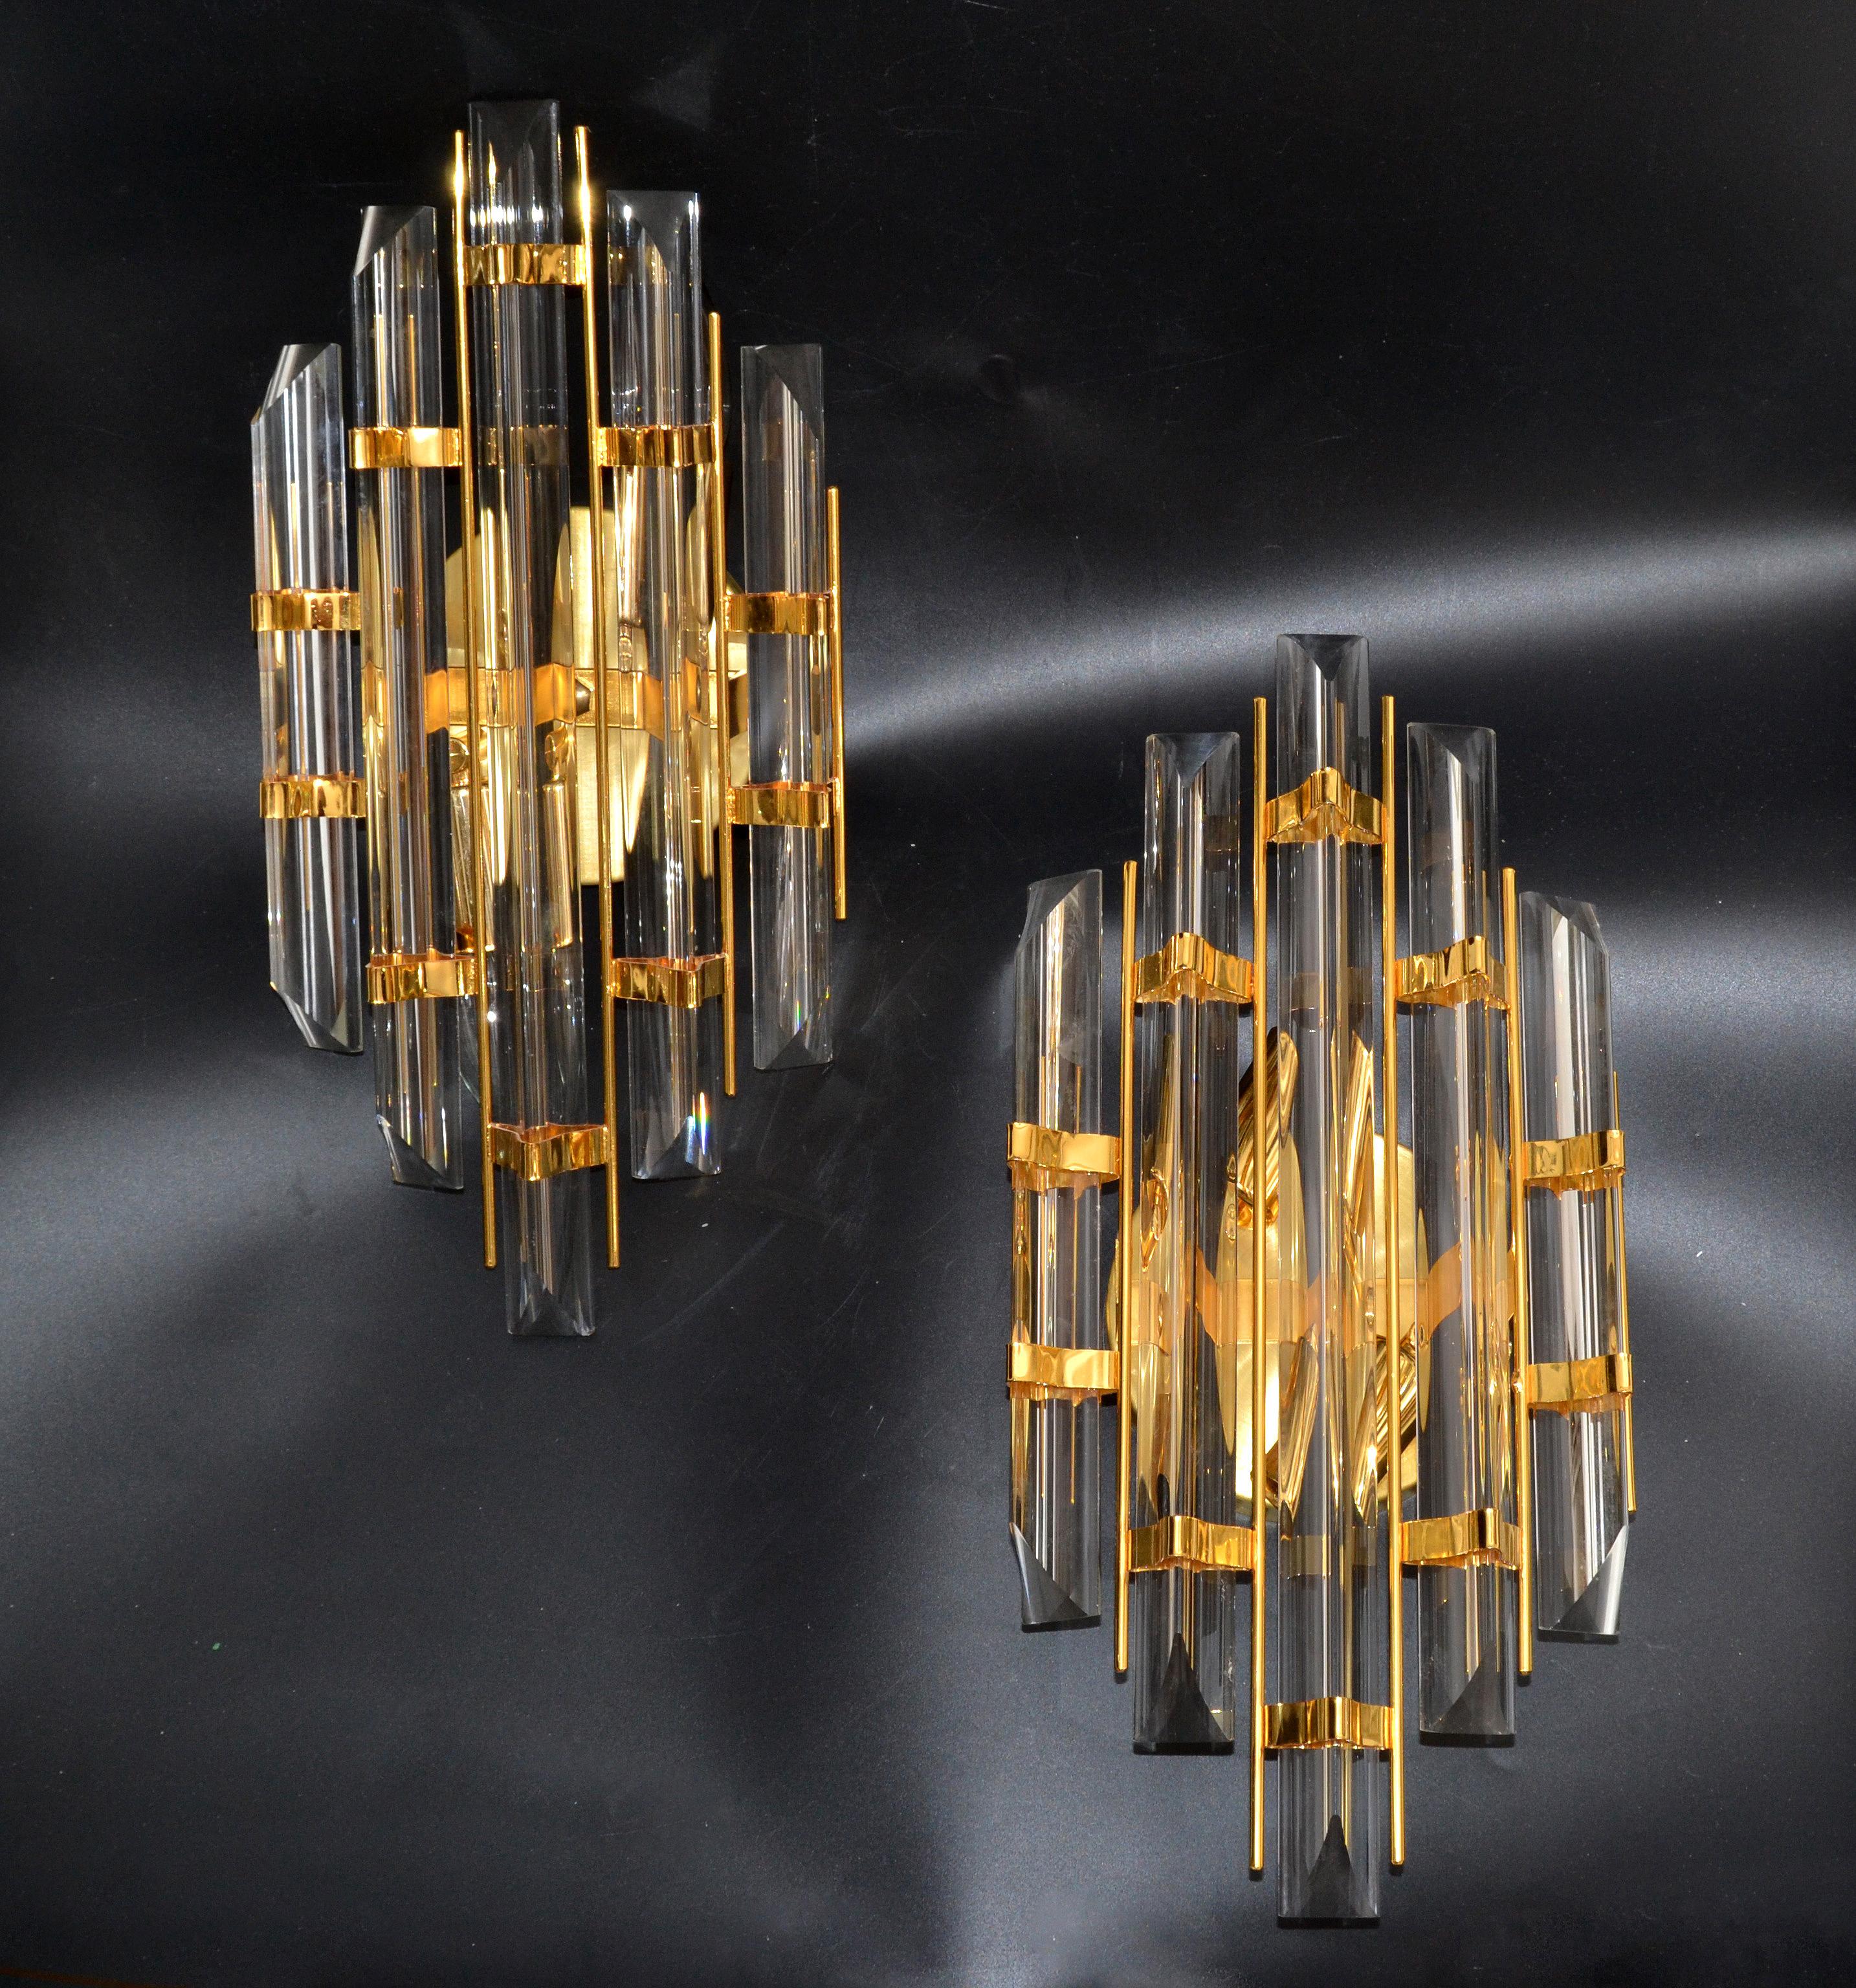 Pair of Venini style crystal glass sconces, triedi glass rod, medium Model, superb. 
A beautiful light through the glass rod.
Takes 2 light regular light bulbs, LED work too.
US rewire and in working condition.
Round back plate measures: